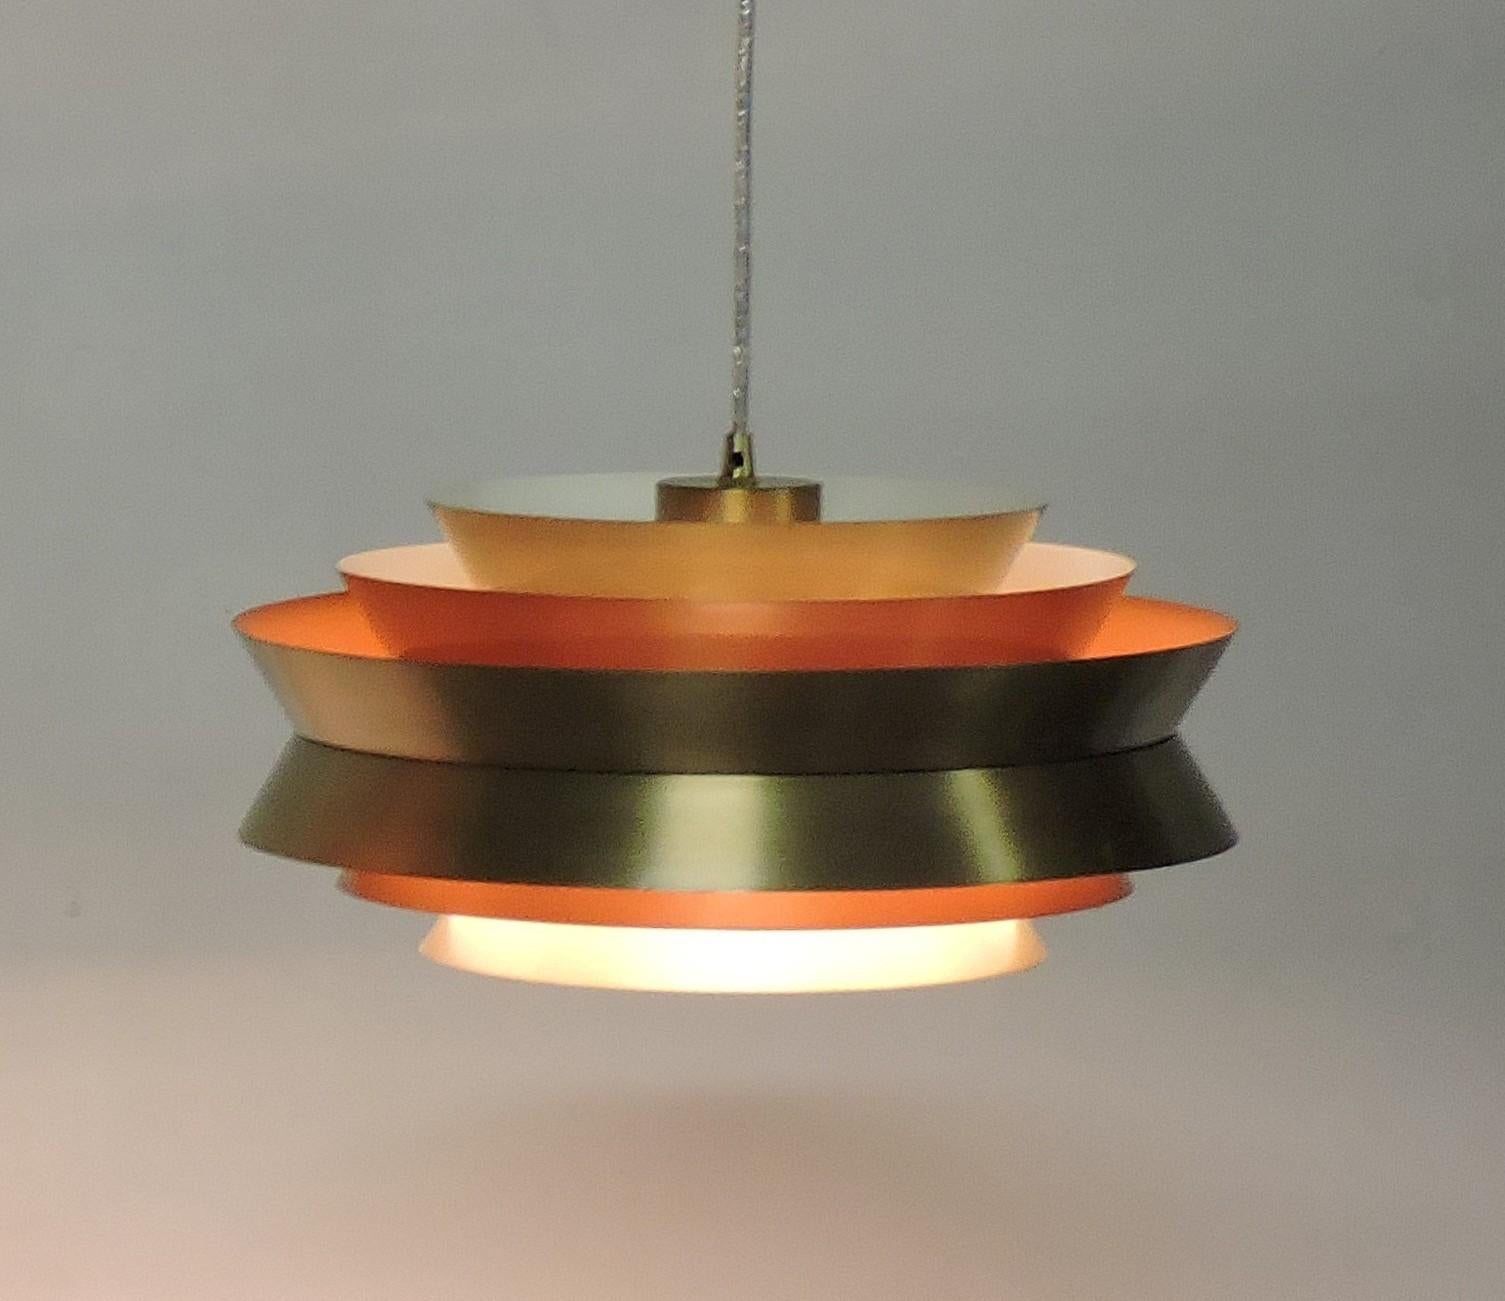 Beautiful Trava pendant light designed by Carl Thore and made in Sweden by Granhaga Metallindustri. This light has six aluminum shades with a brushed brass finish on the outside and white and orange on the inside, which makes for a beautiful glow